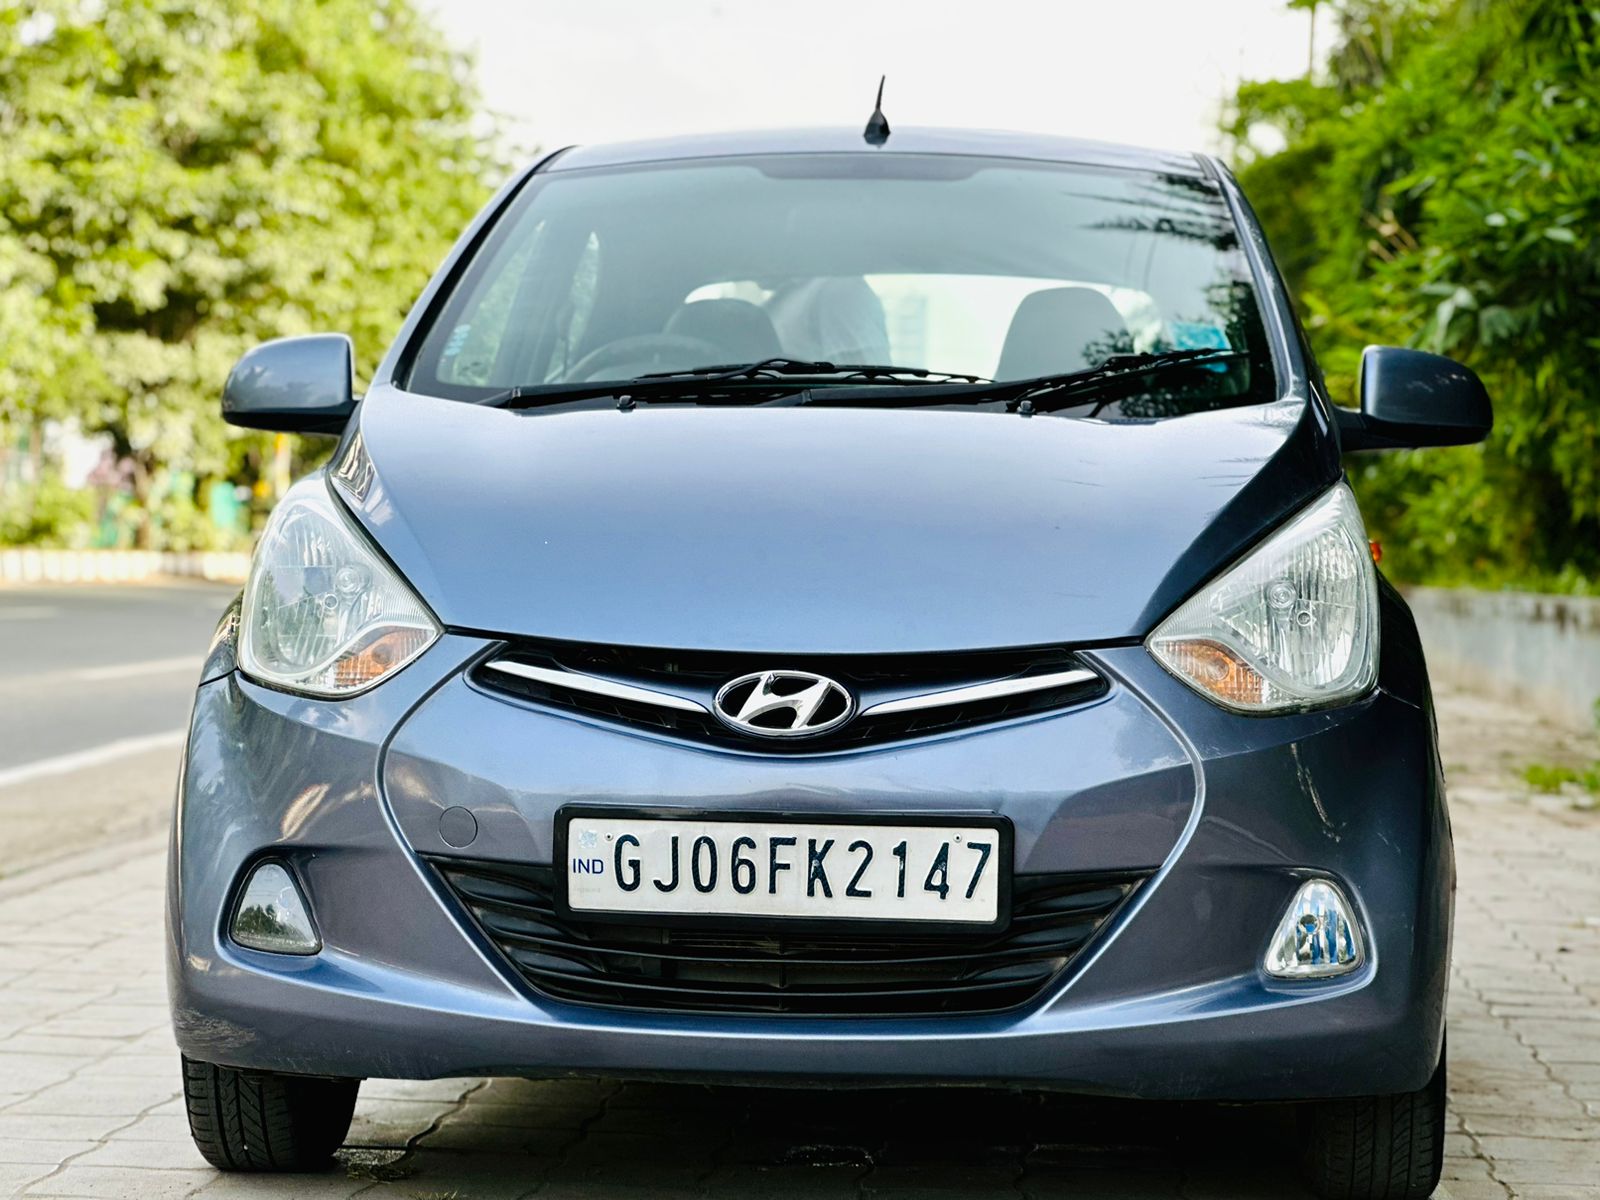 Details View - Hyundai EON photos - reseller,reseller marketplace,advetising your products,reseller bazzar,resellerbazzar.in,india's classified site, Hyundai EON , used Hyundai EON  , old  Hyundai EON ,old  Hyundai EON in Vadodara , Hyundai EON  in Vadodara